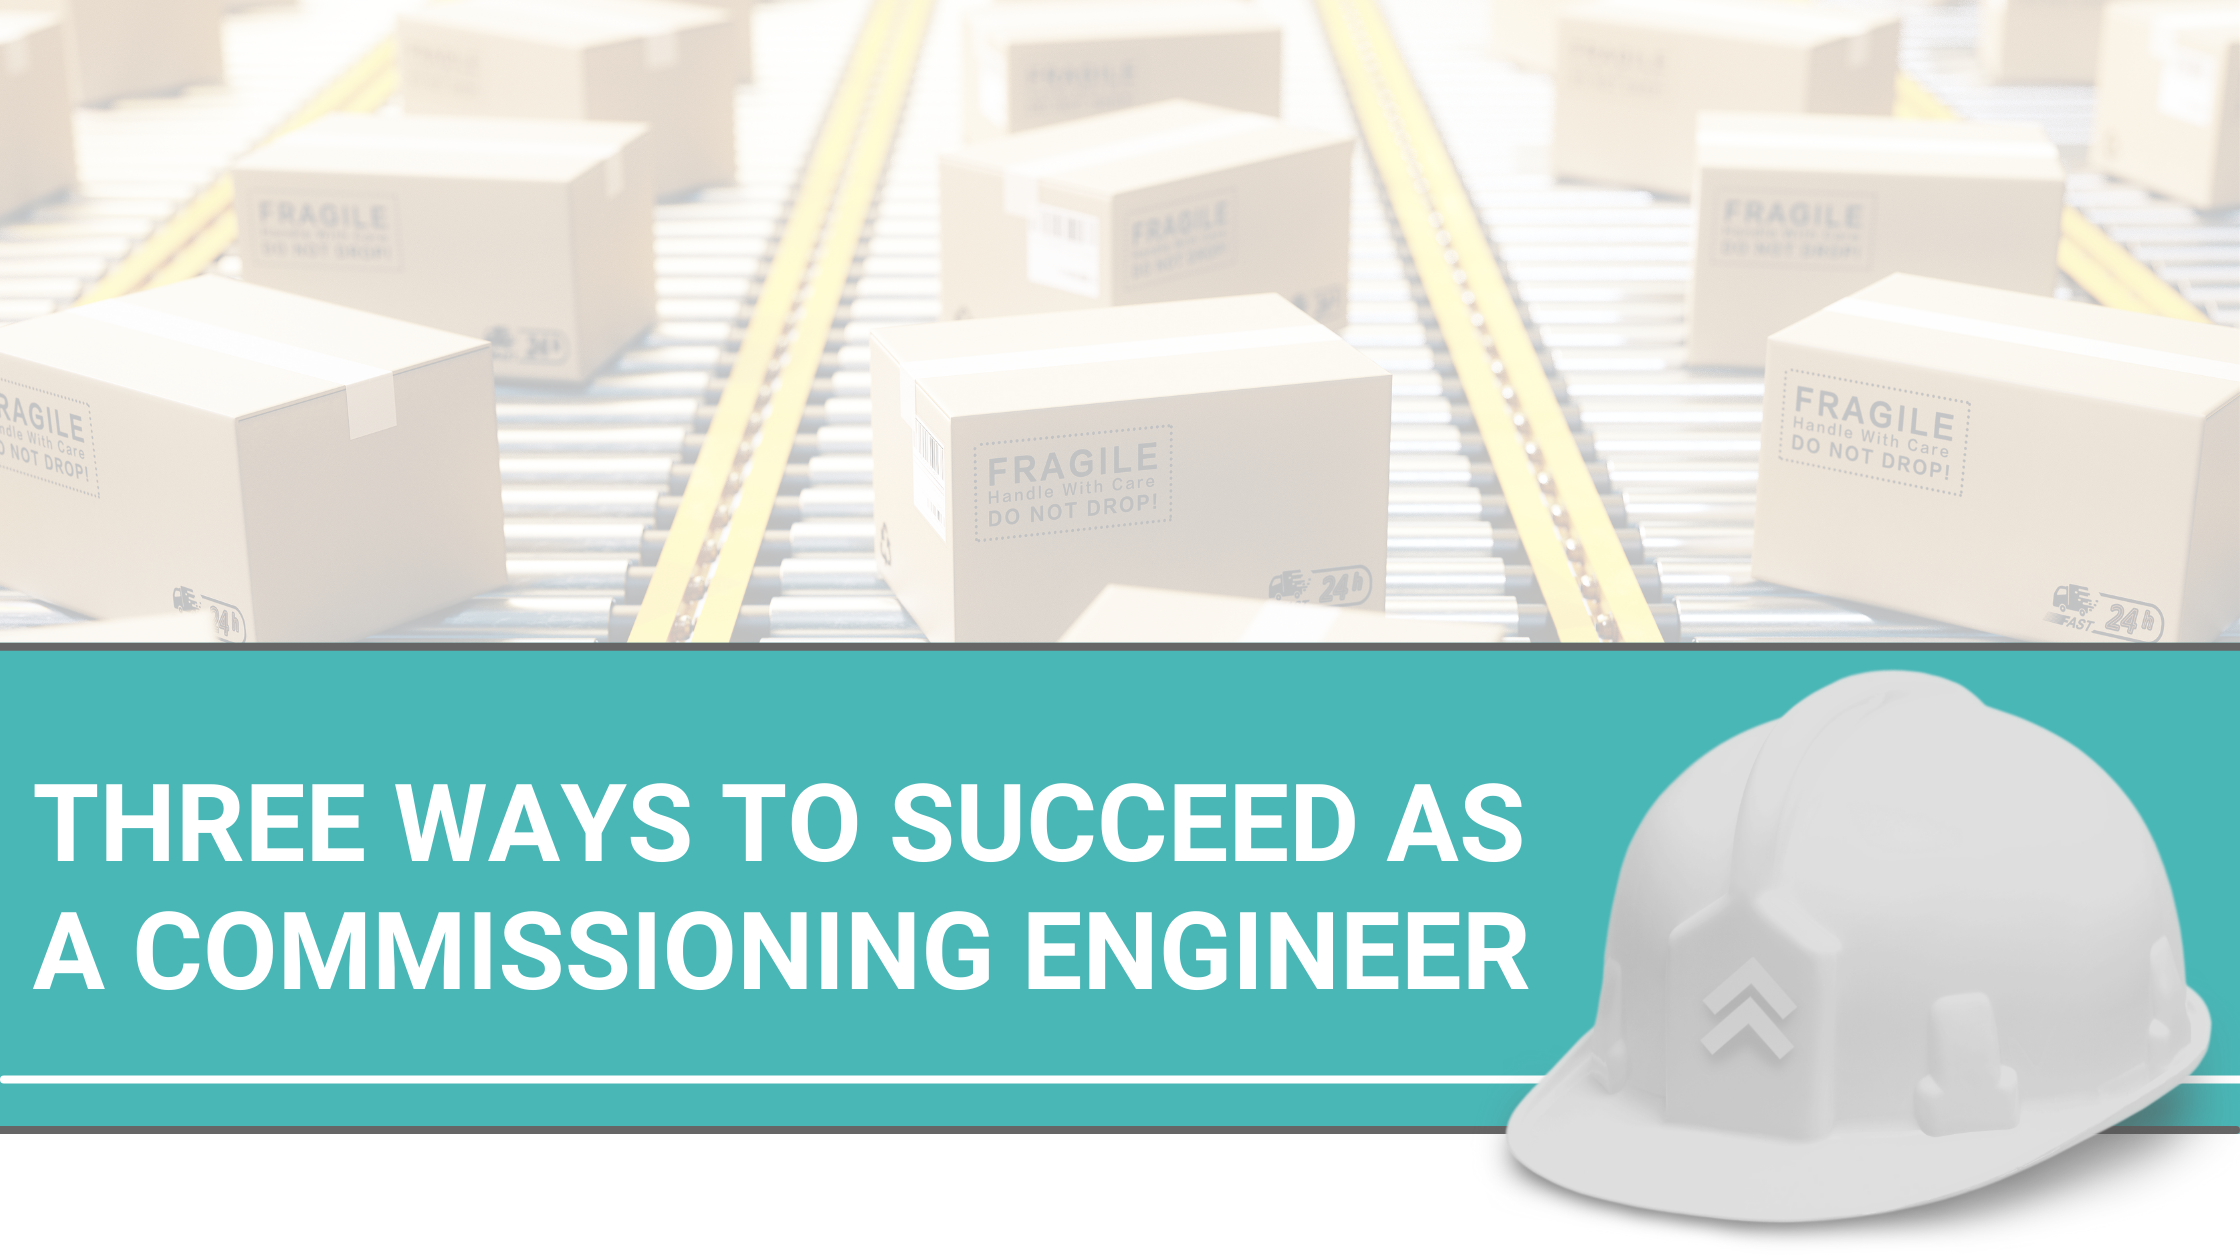 Three Ways to Succeed as a Commissioning Engineer